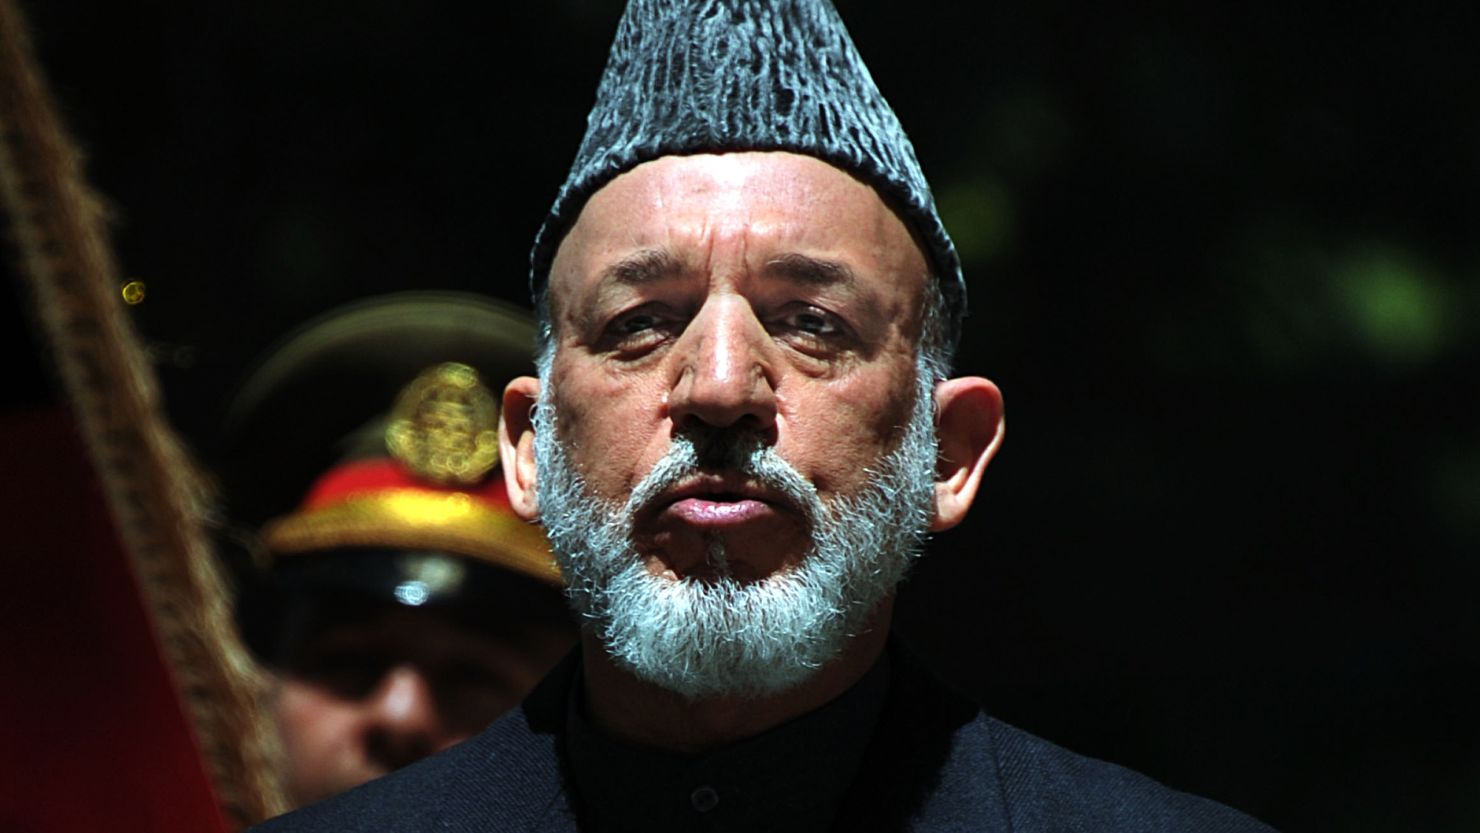 Afghan President Hamid Karzai speaks at a press conference in Kabul on May 3.